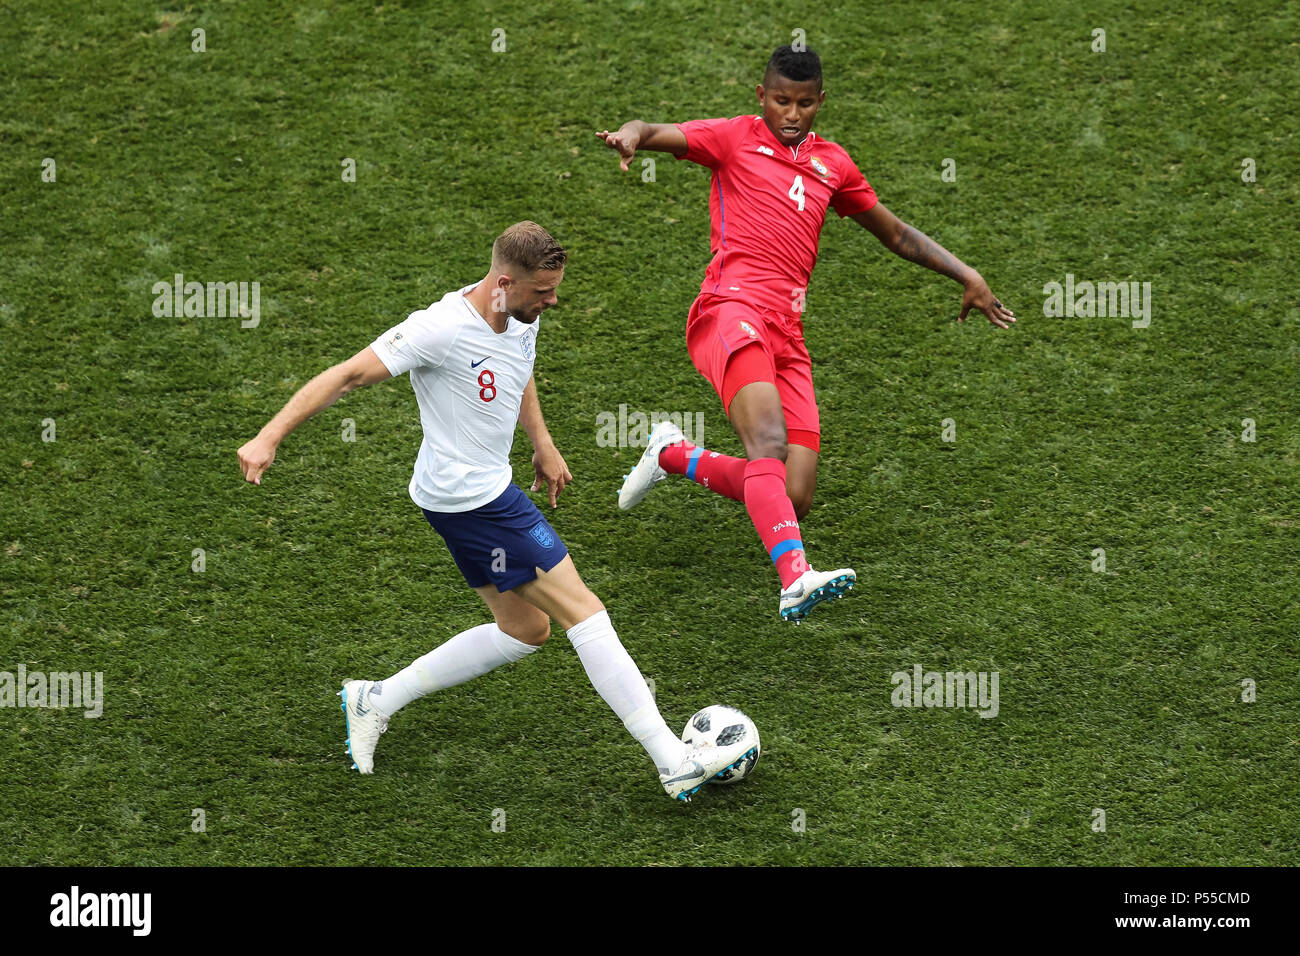 Jordan Henderson of England is tackled by Fidel Escobar of Panama during the 2018 FIFA World Cup Group G match between England and Panama at Nizhny Novgorod Stadium on June 24th 2018 in Nizhny Novgorod, Russia. (Photo by Daniel Chesterton/phcimages.com) Stock Photo